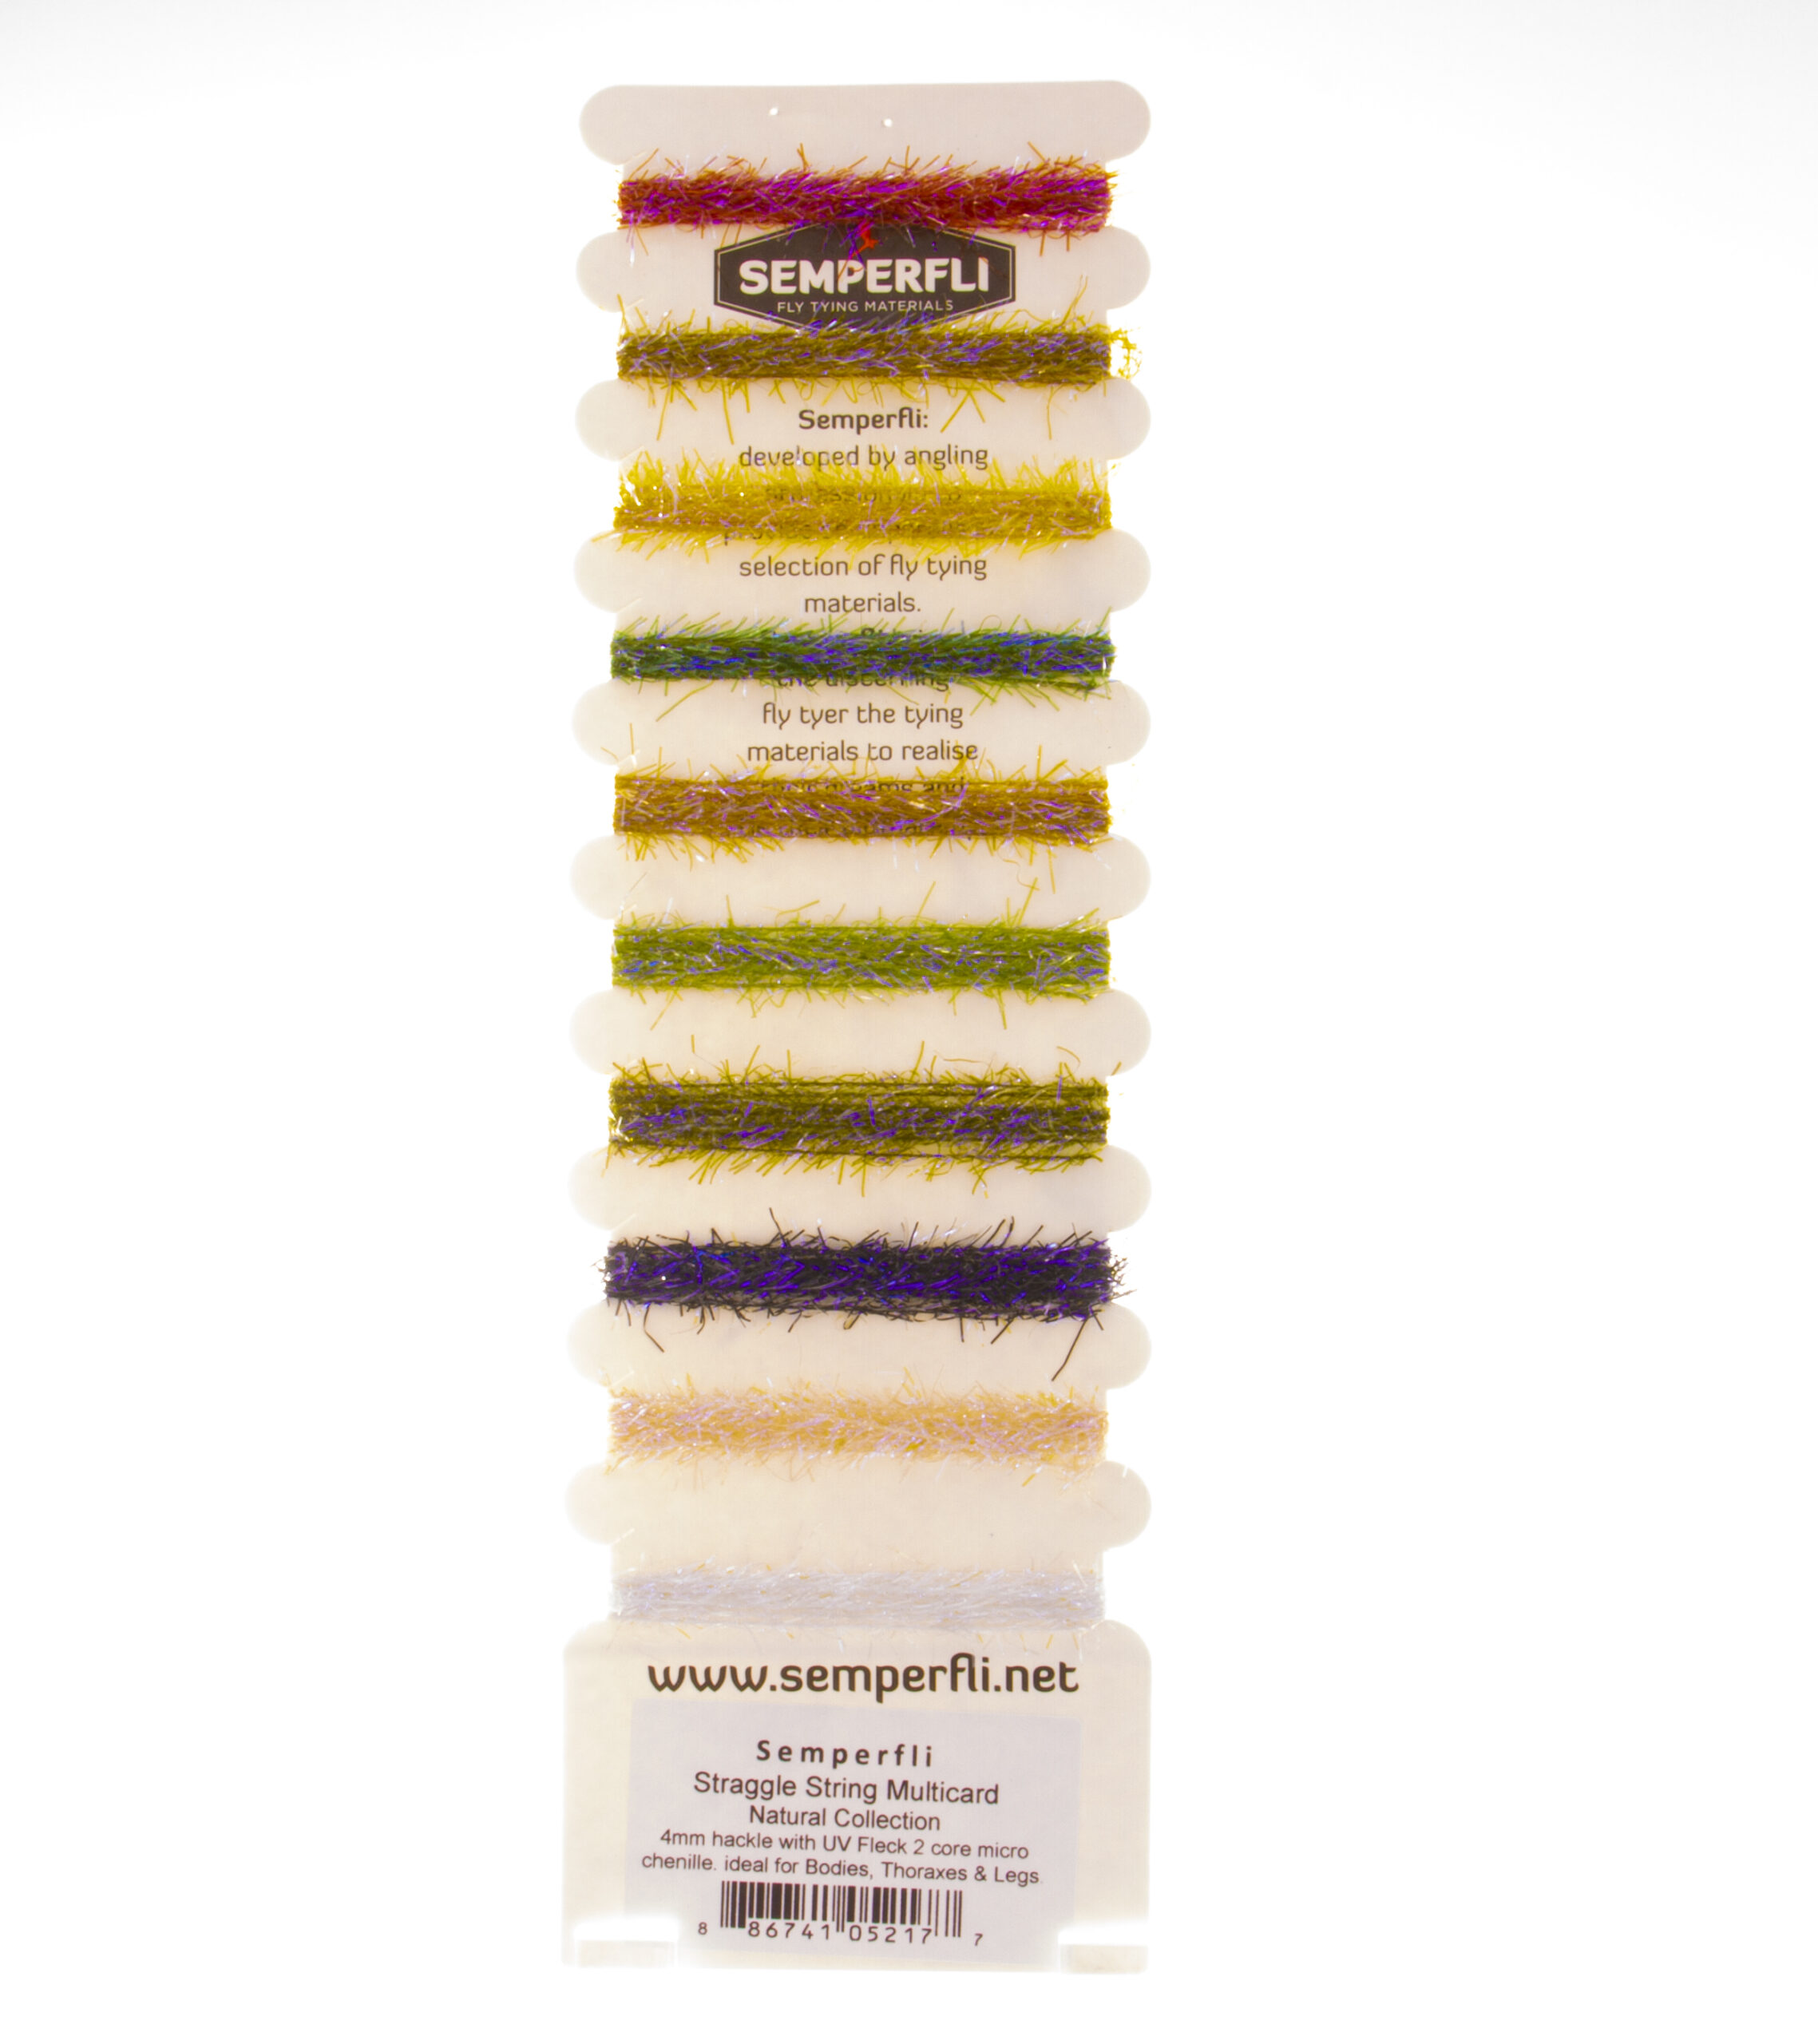 Semperfli Straggle String Multicard Pack Naturals Collection